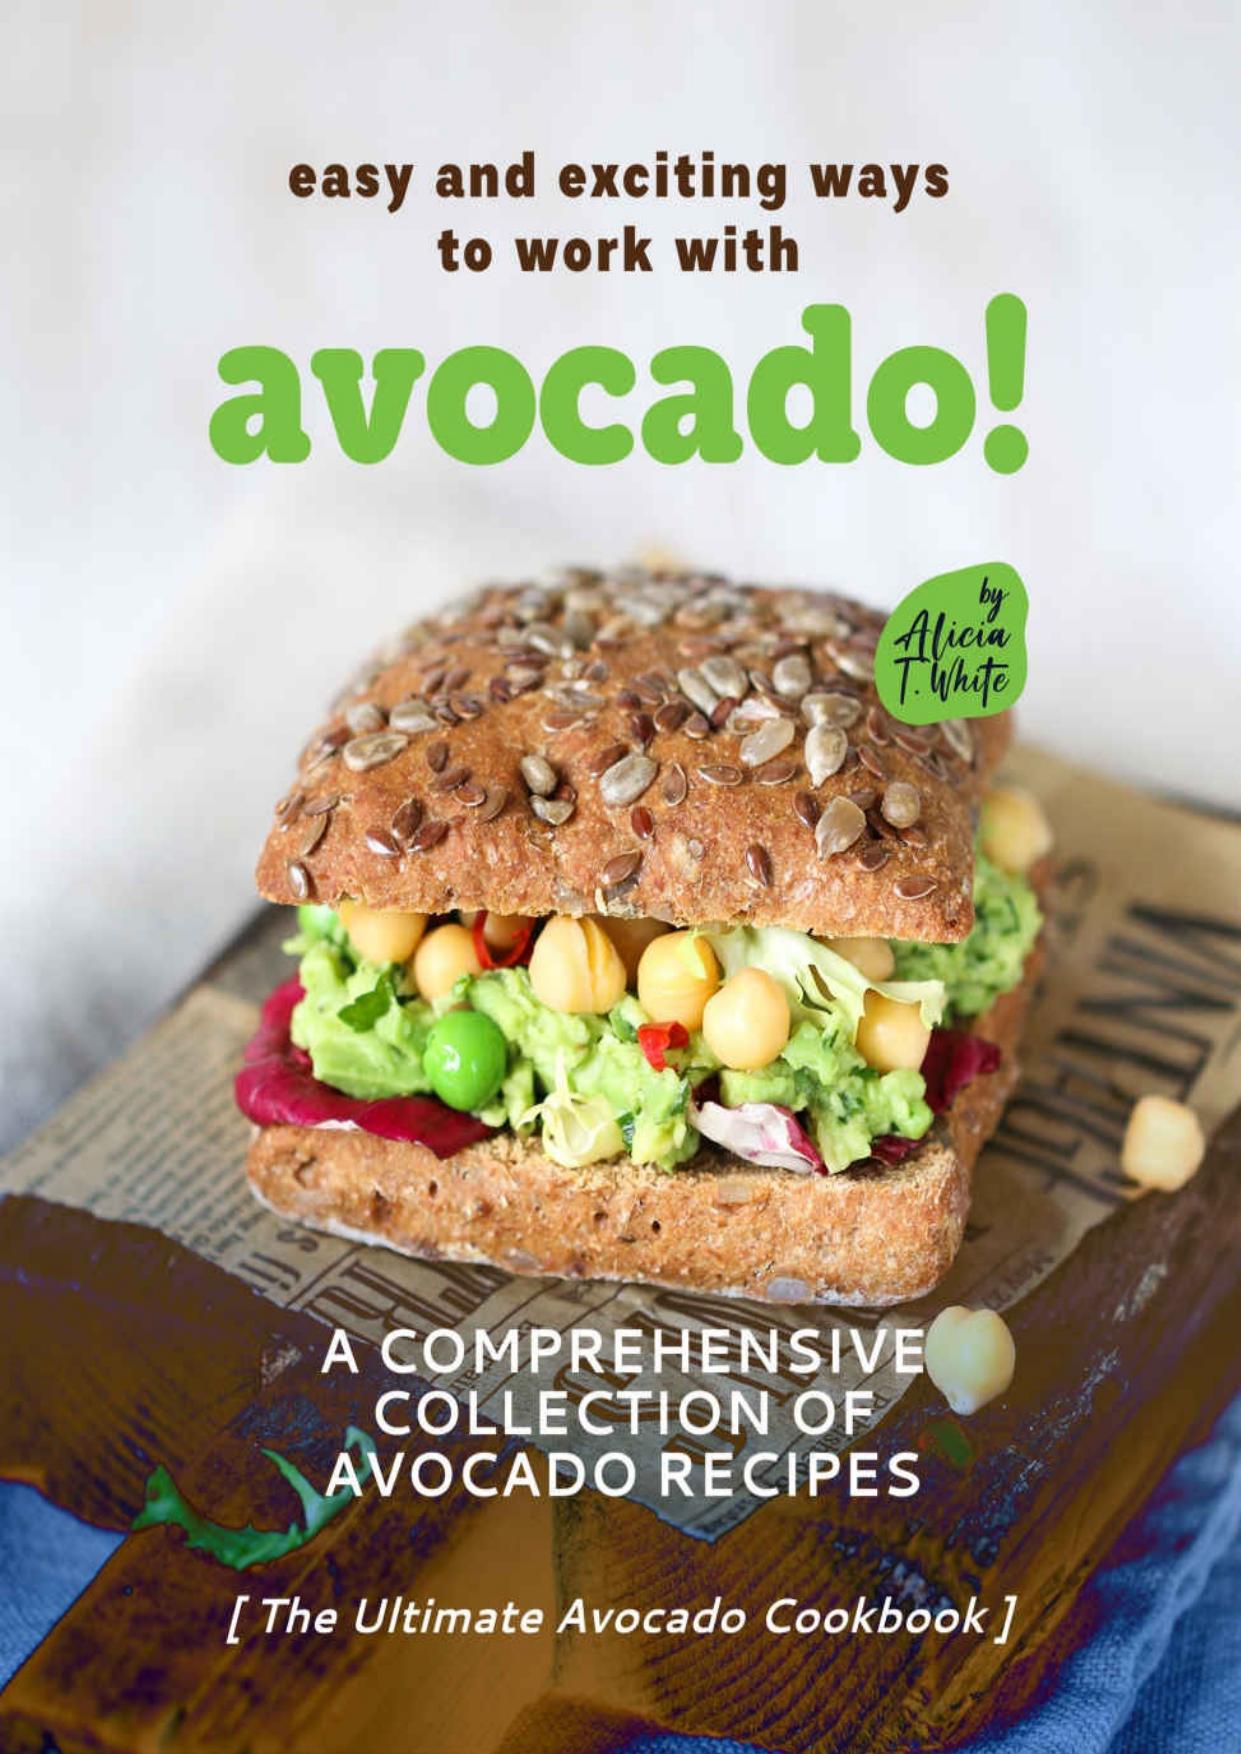 Easy and Exciting Ways to Work with Avocado!: A Comprehensive Collection of Avocado Recipes (The Ultimate Avocado Cookbook) by T. White Alicia